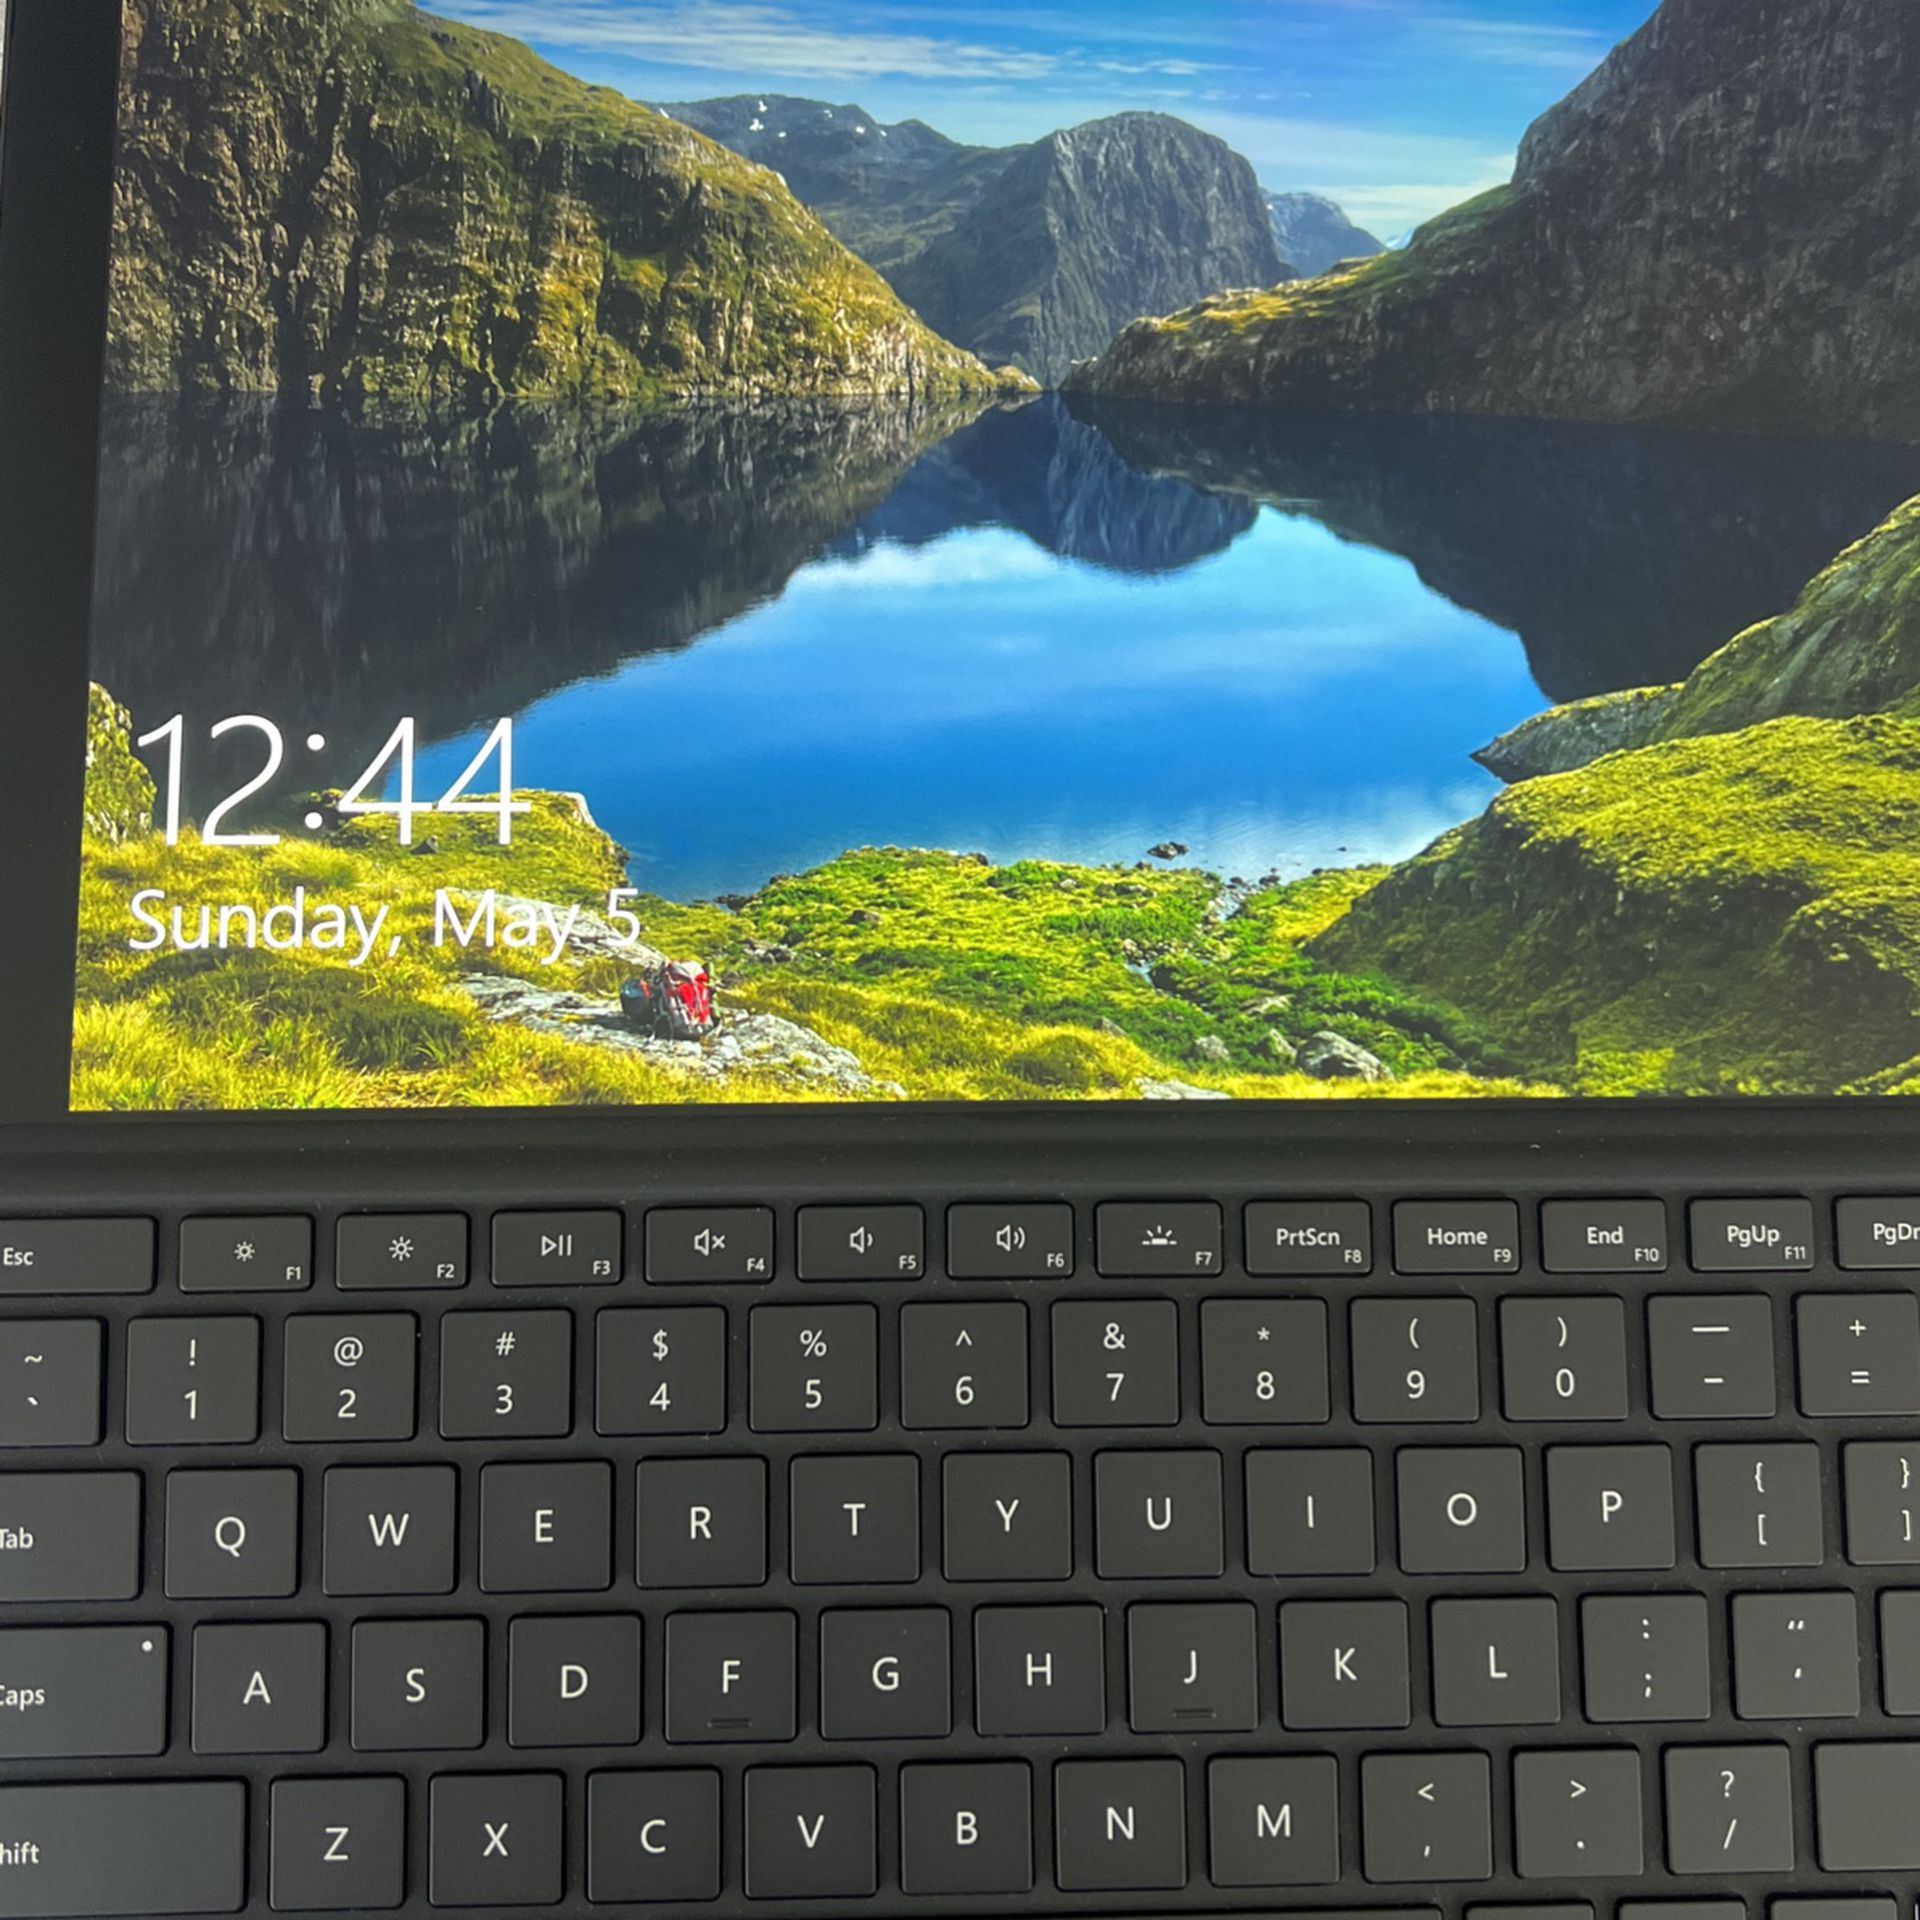 Surface Tablet Pro 7 +